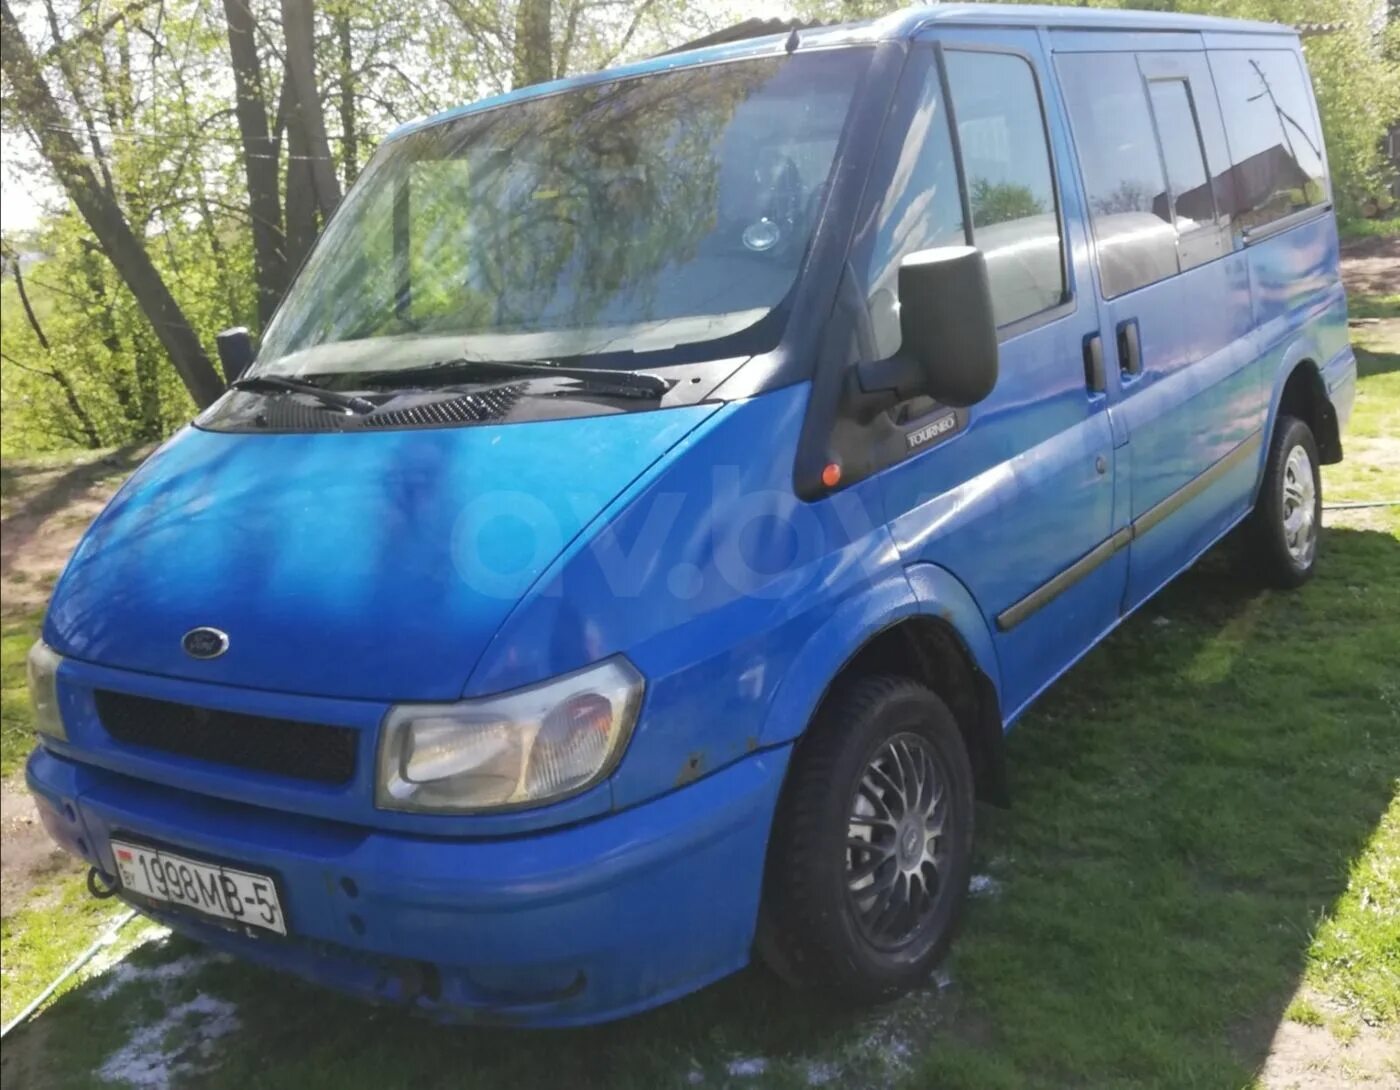 Форд Транзит 2002. Ford Tourneo 2002. Ford Transit Transit 2004. Форд Транзит Торнео.